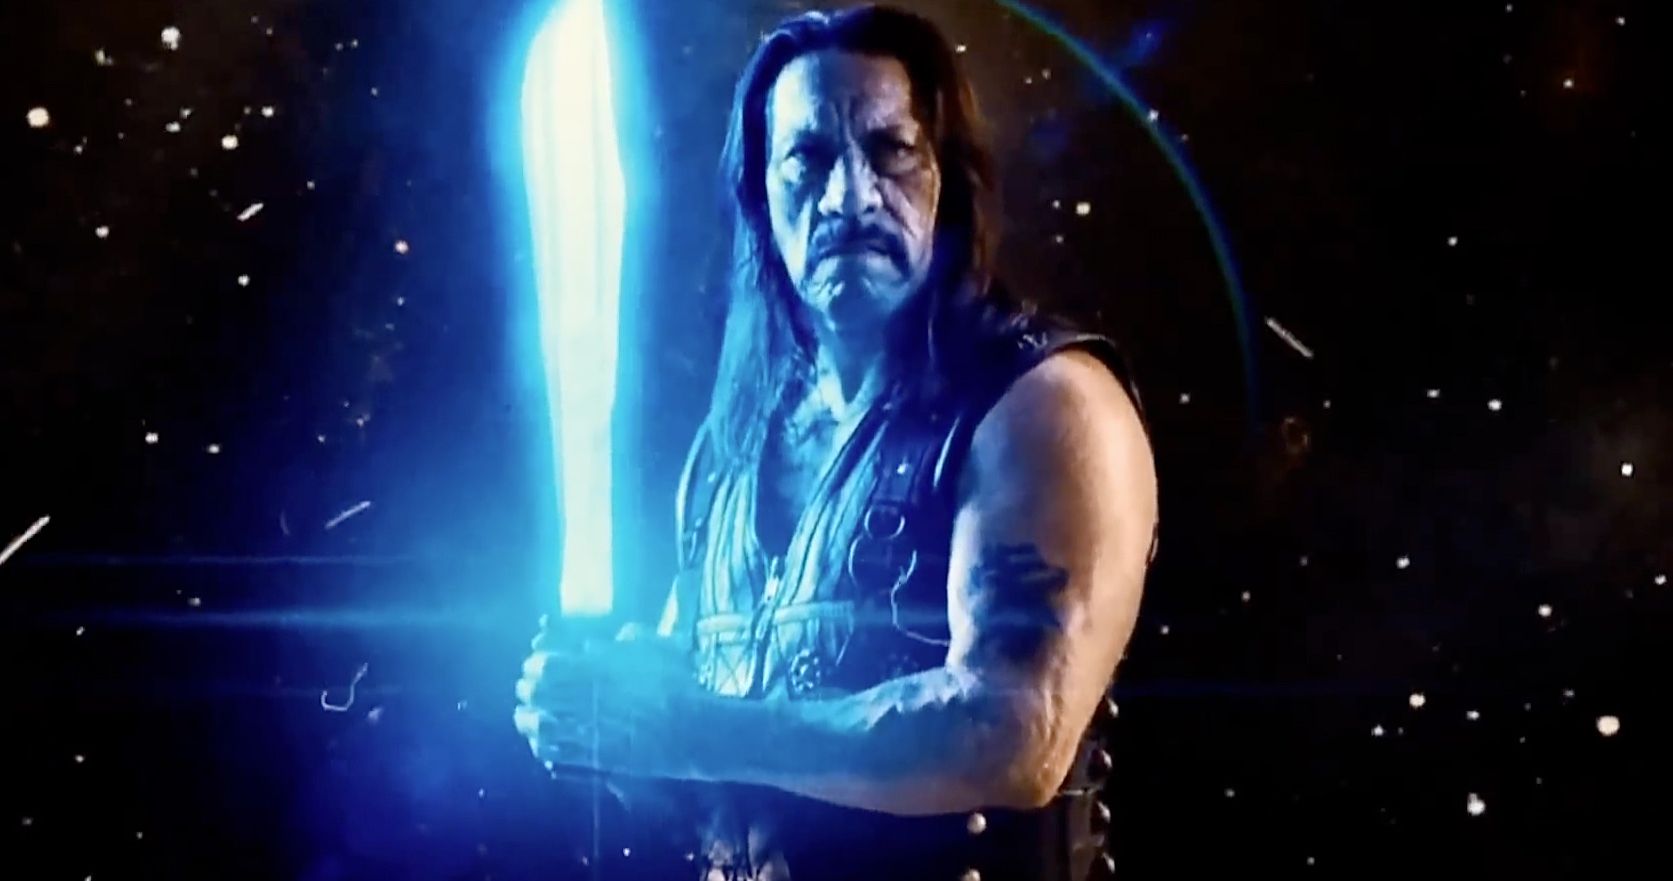 Fans Won't Stop Asking Robert Rodriguez for Machete Kills in Space